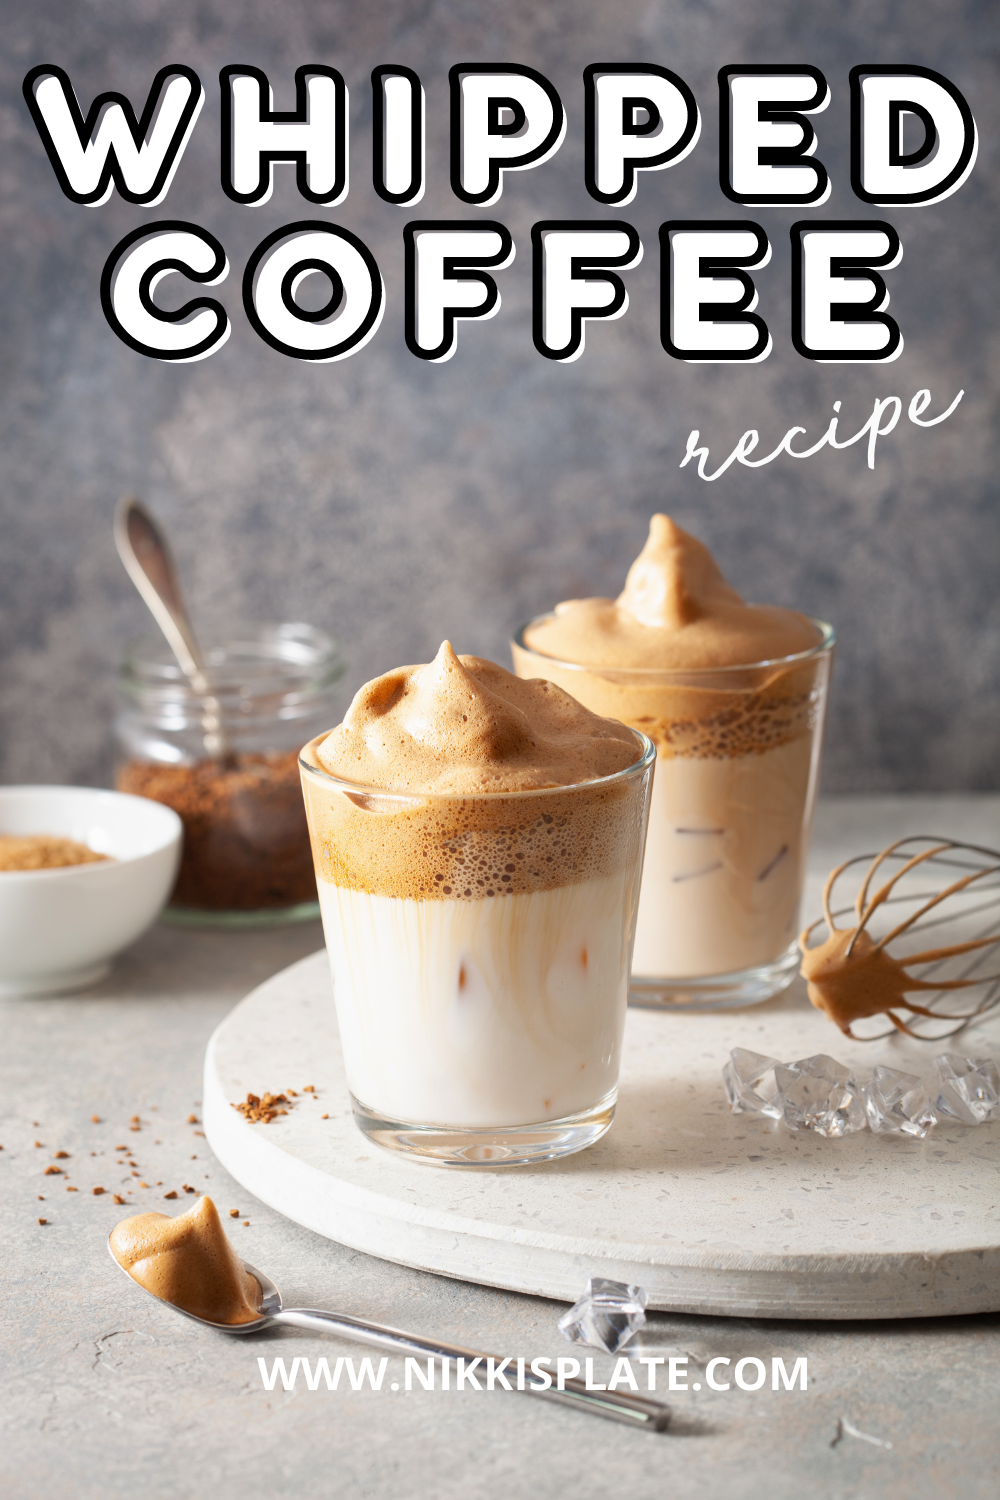 Whipped Coffee Recipe - NYT Cooking